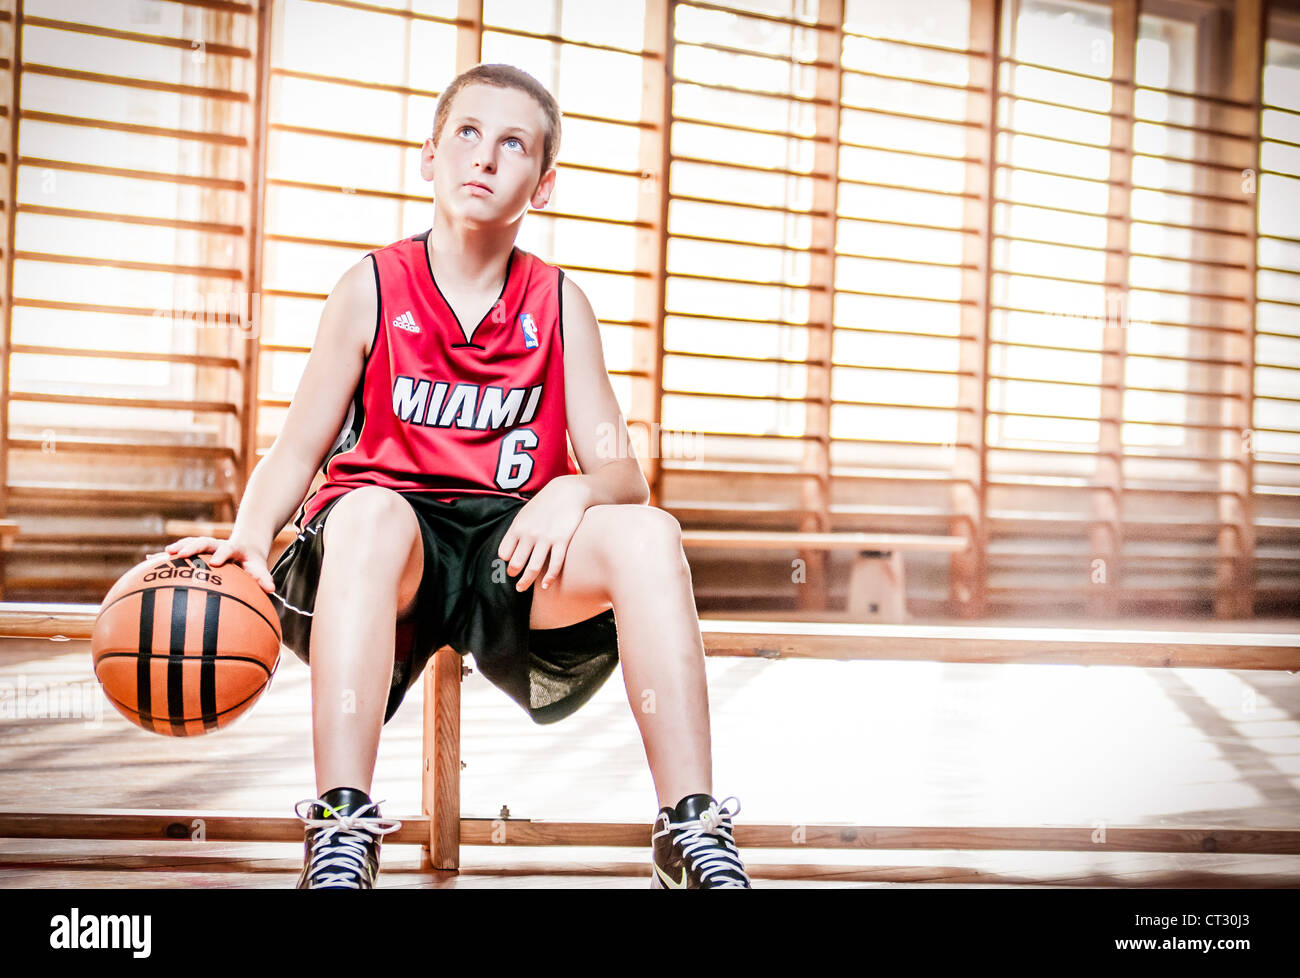 Teenager boy sitting on wooden bench holding basketball in basketball ...